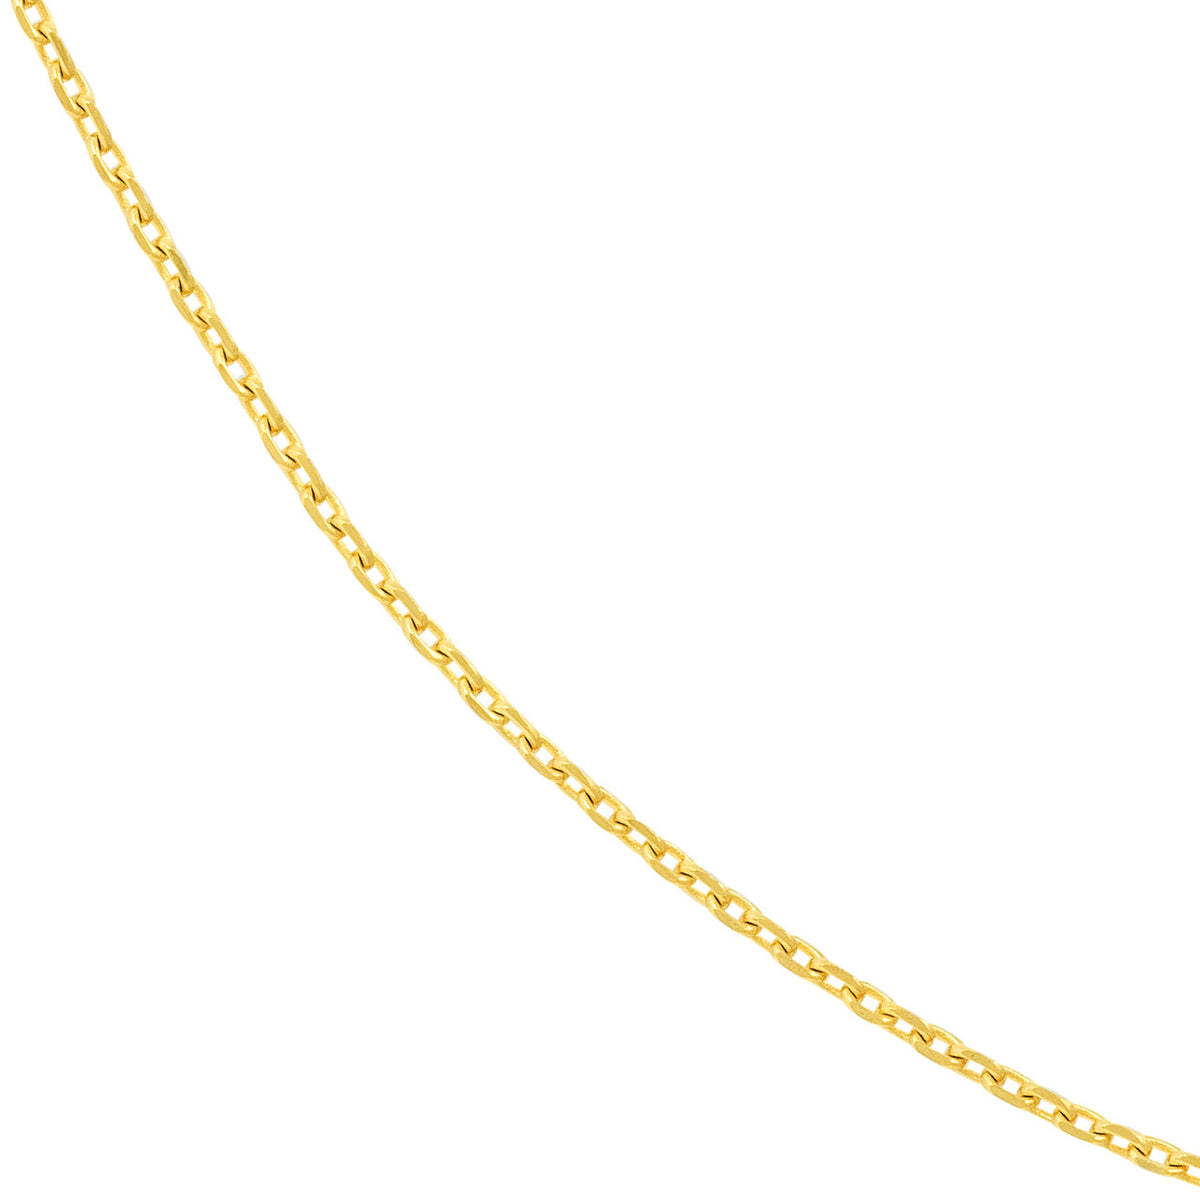 14K Yellow Gold and White Gold 0.65mm Diamond Cut Cable Chain Necklaces with Spring Ring